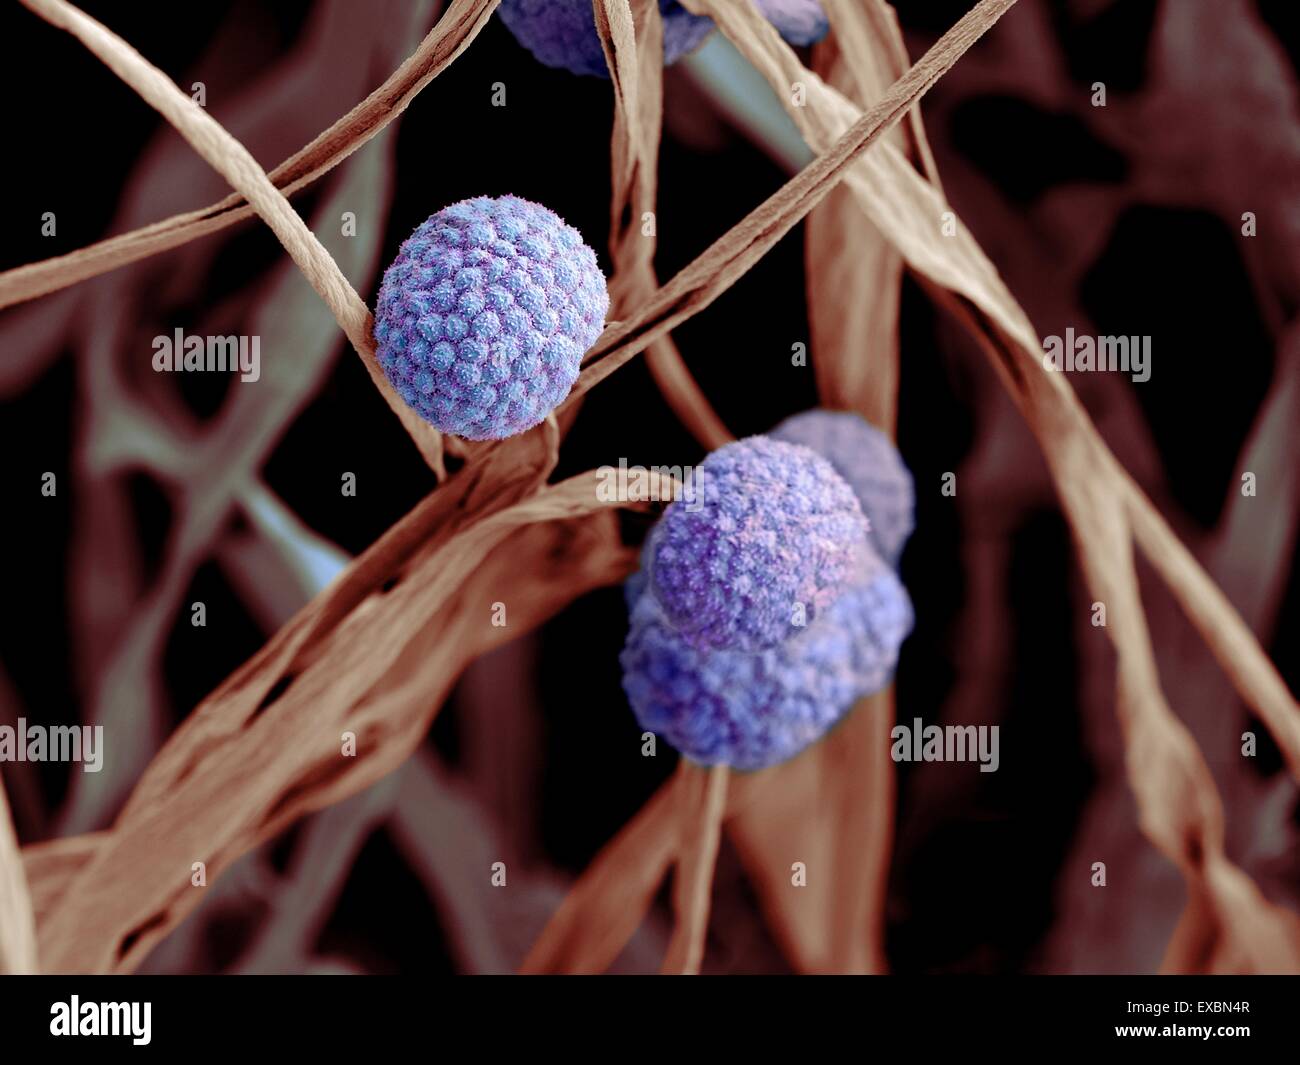 Coloured scanning electron micrograph (SEM) of fungal cells. The round structures are sporangia, which house the fungus' Stock Photo